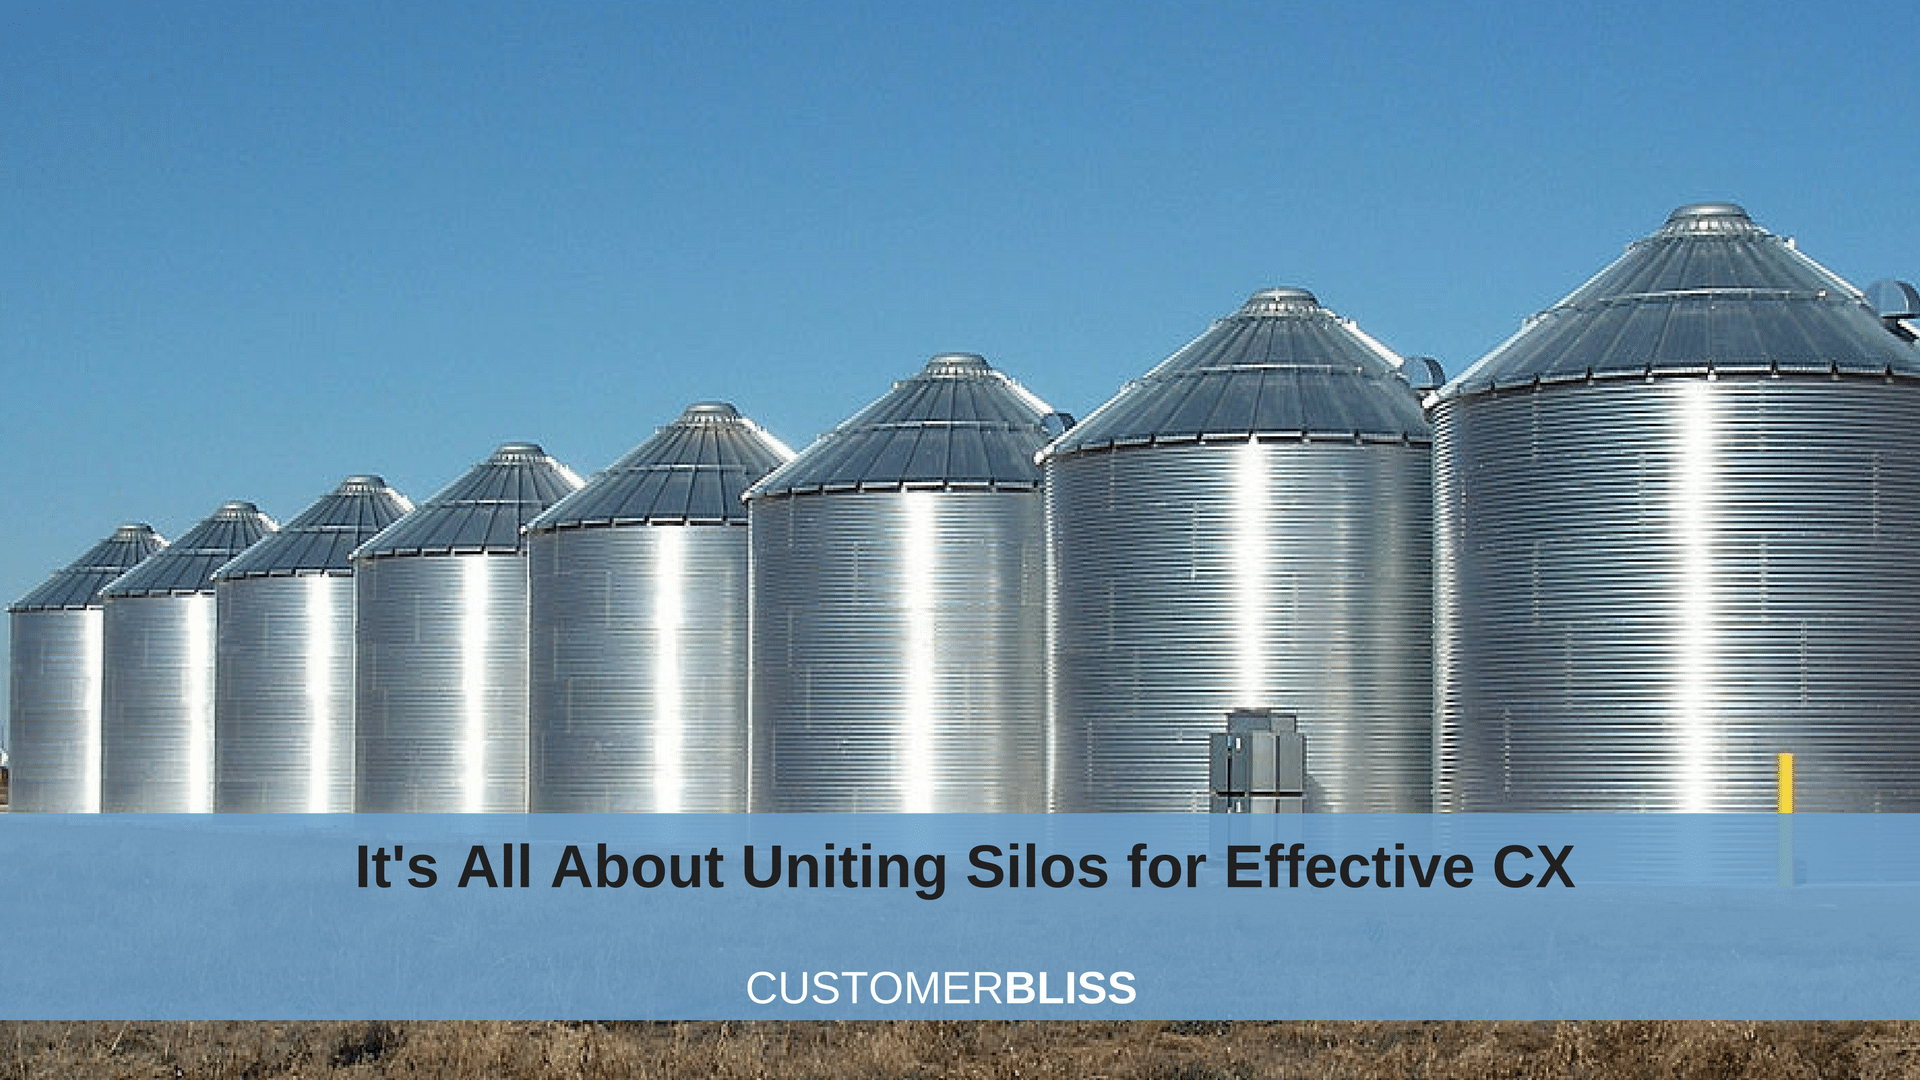 It's all about uniting silos for effective CX